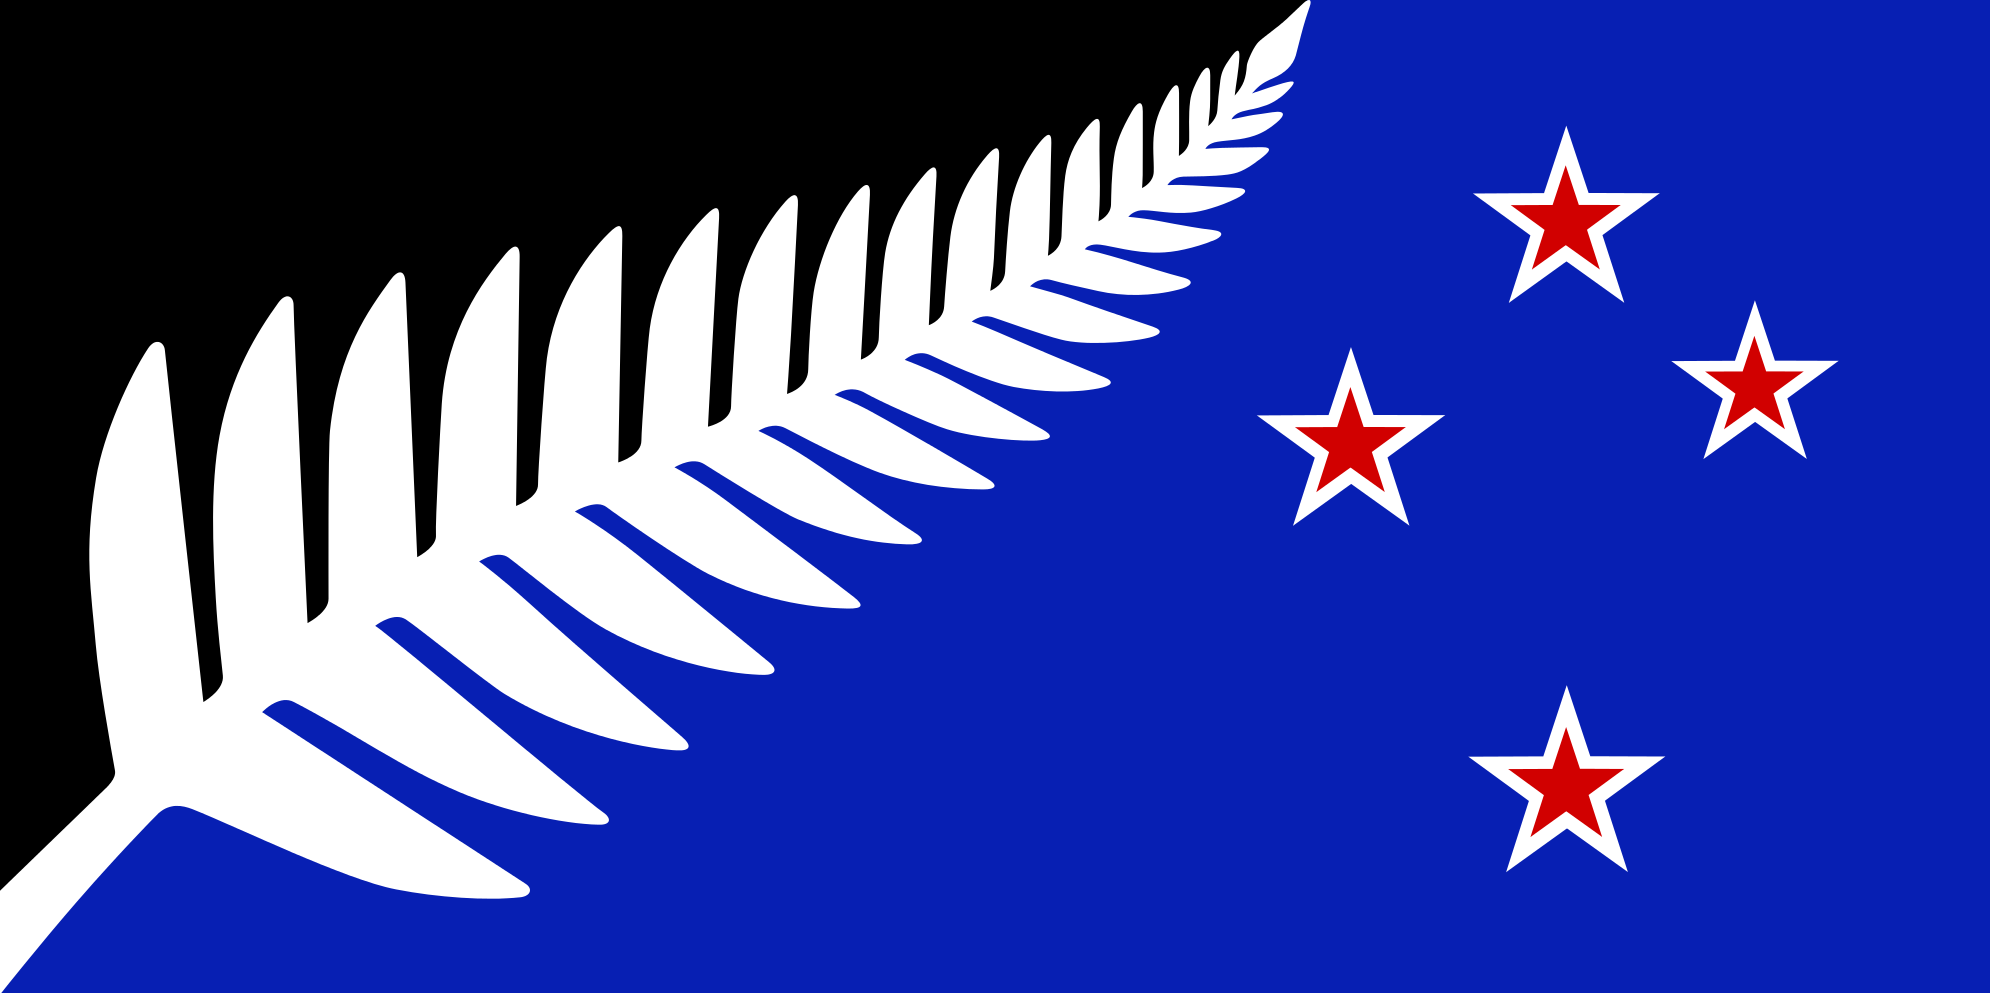 New Zealand Is Keeping Its Flag After All